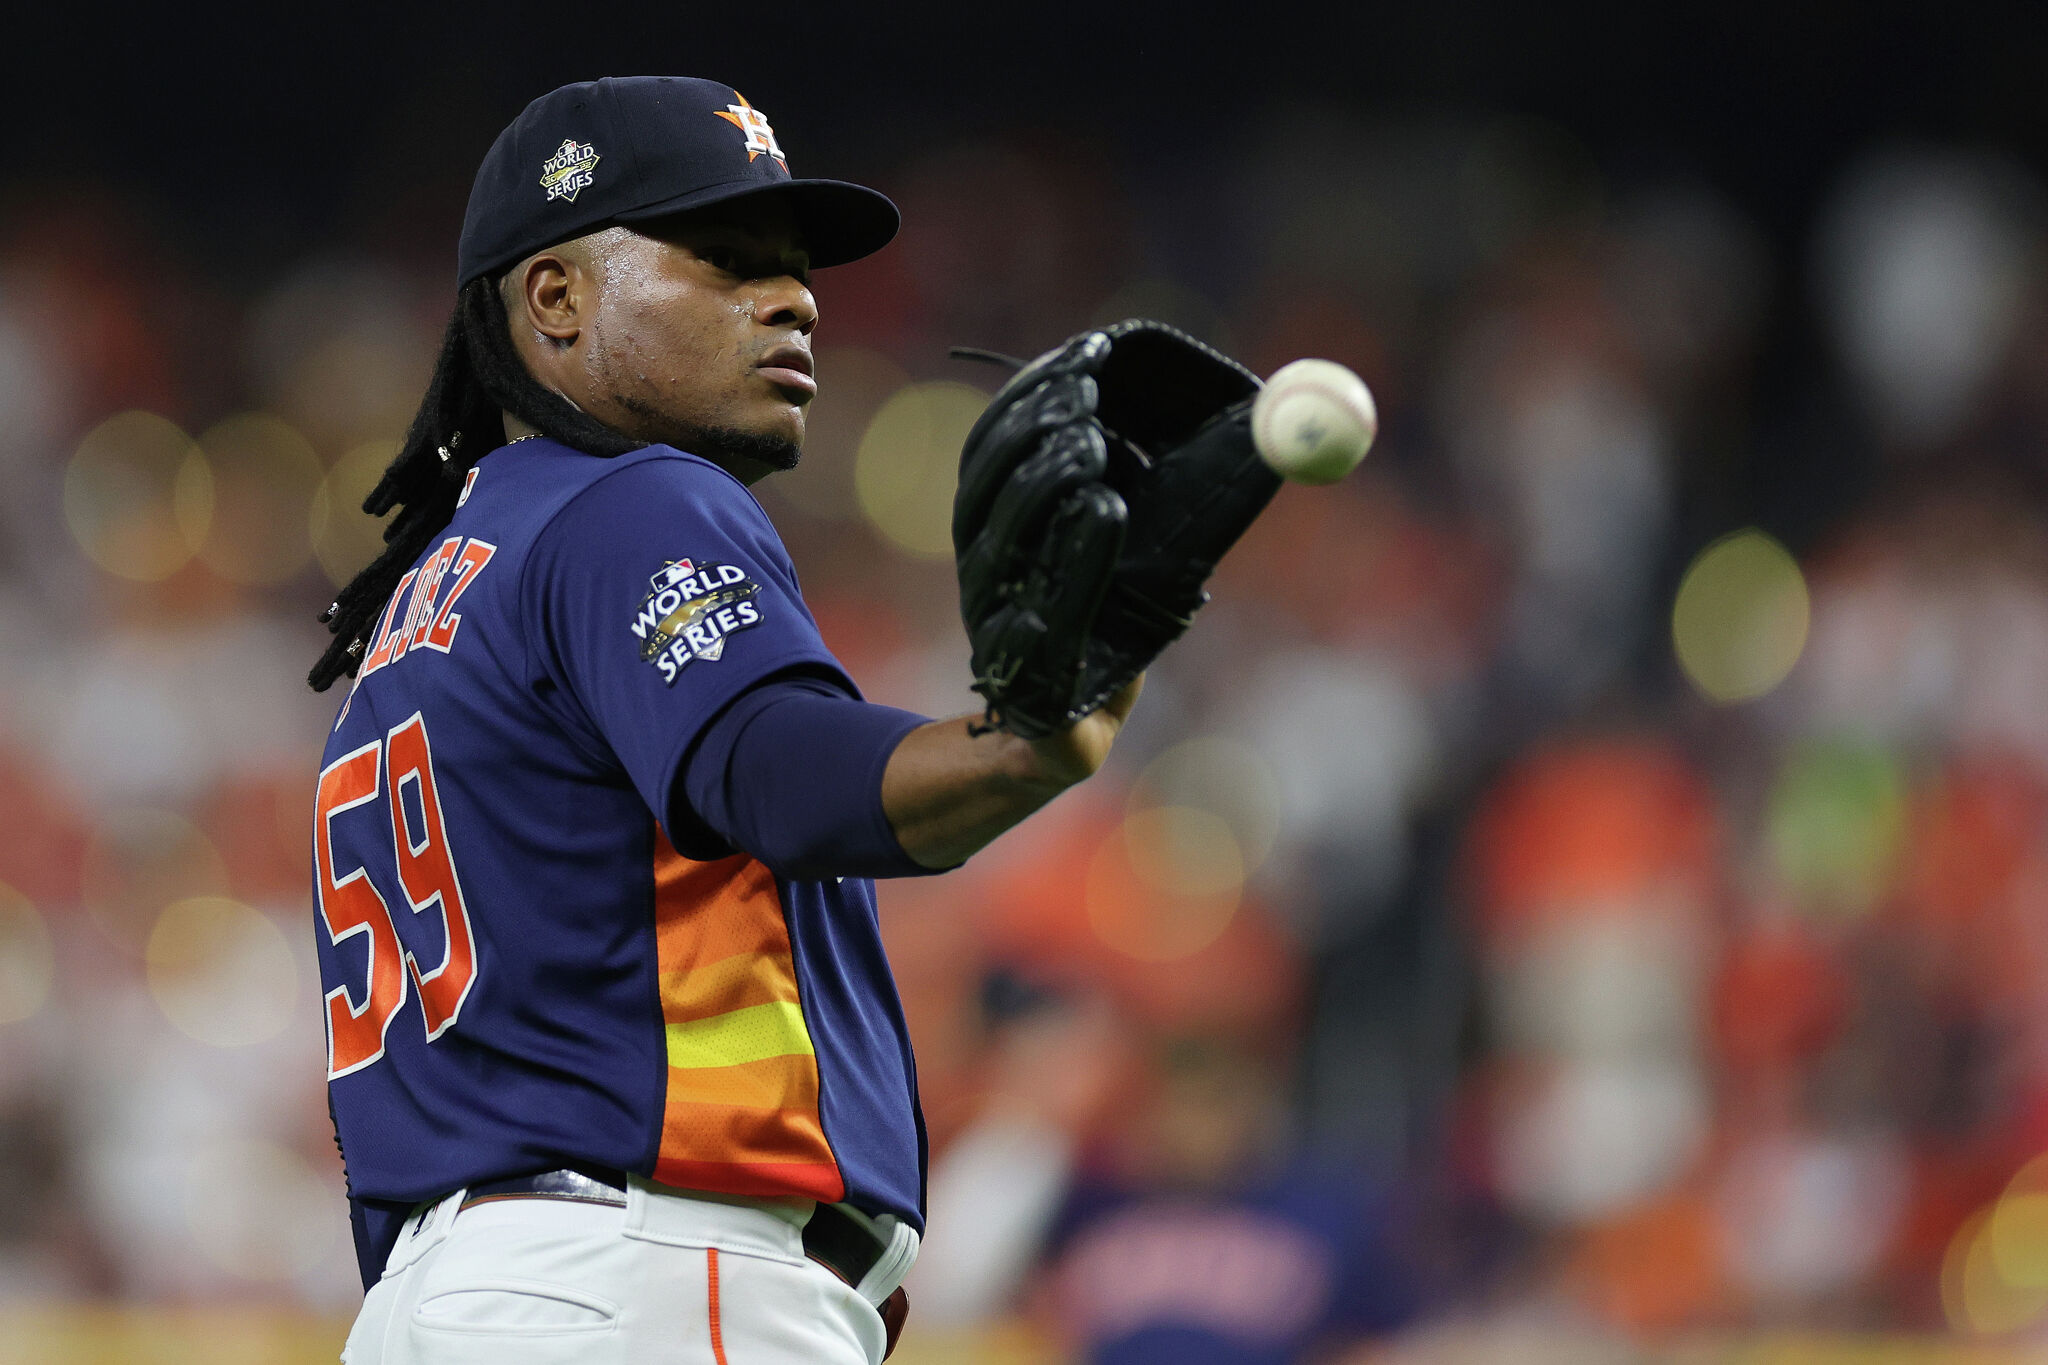 Houston Astros: 11 to participate in World Baseball Classic